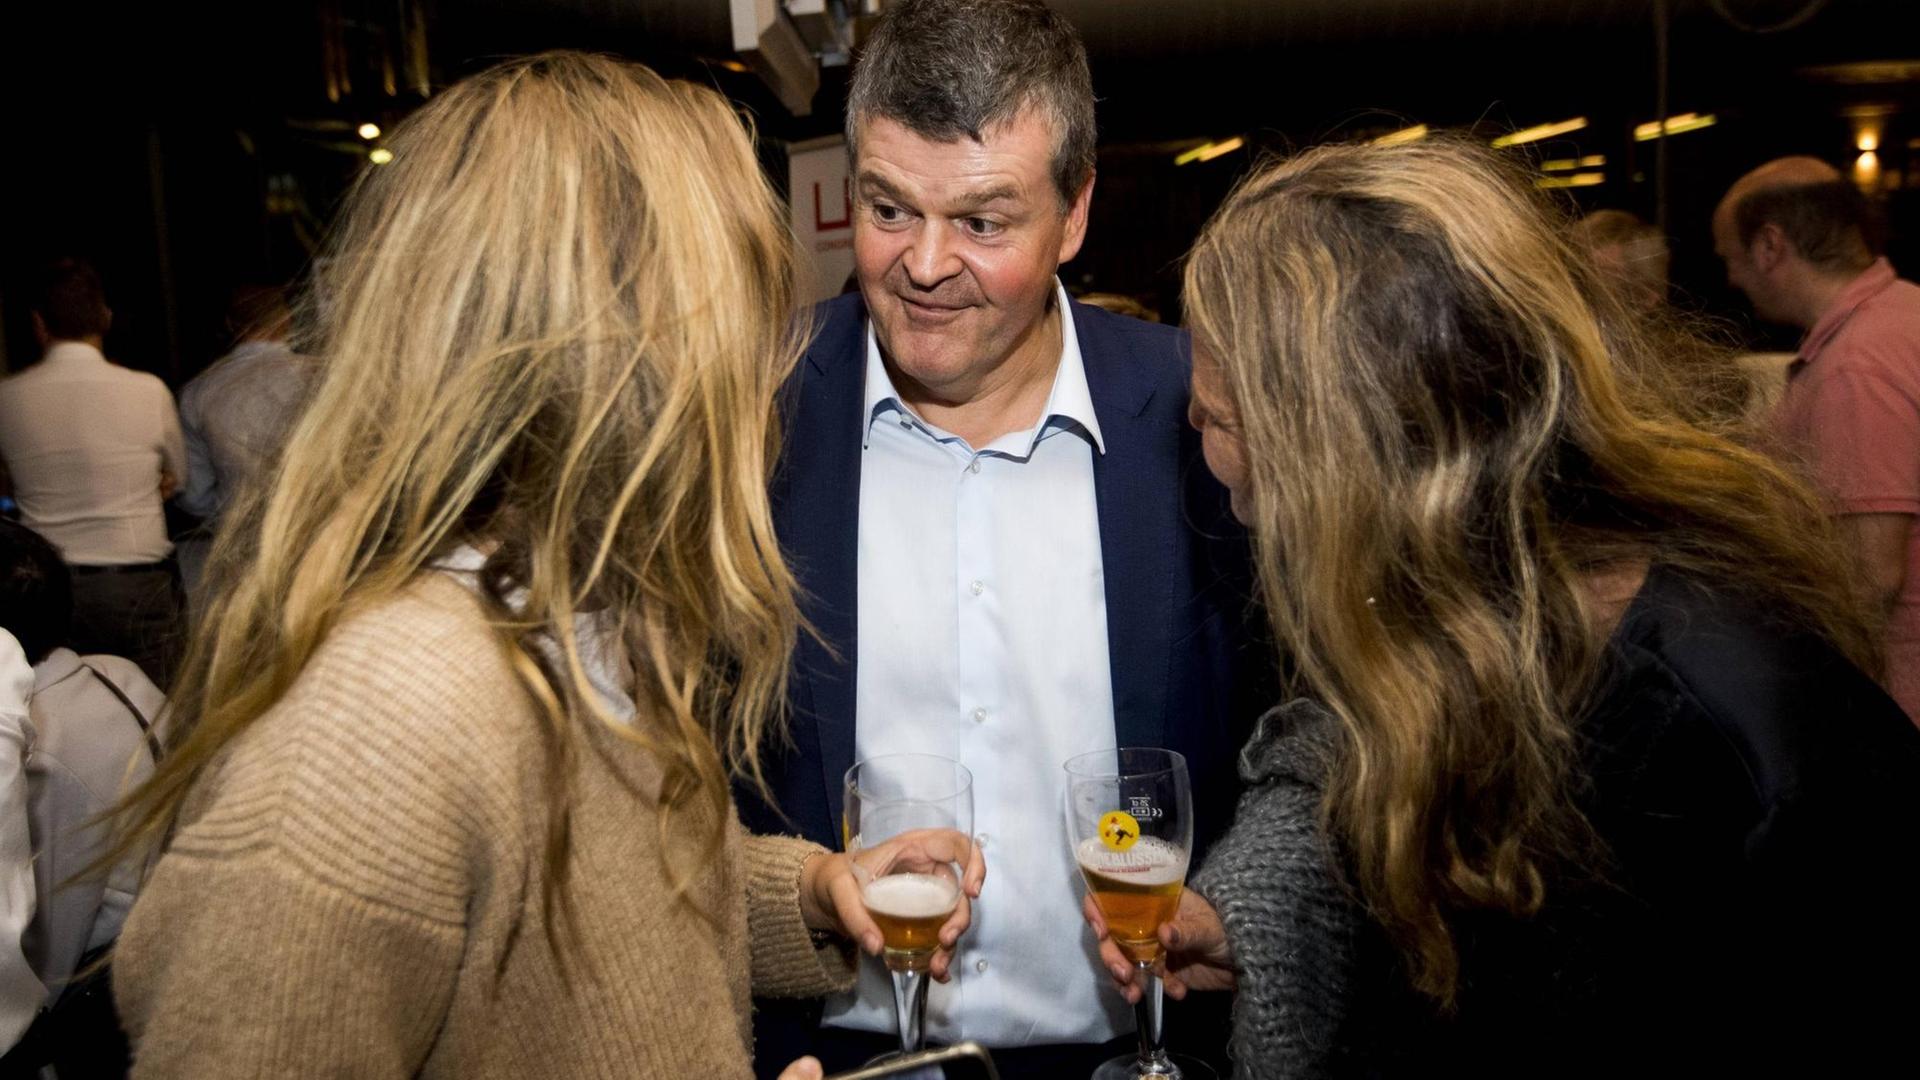 Mechelen mayor Bart Somers celebrates at a party meeting on the evening after the local elections, in Mechelen, Sunday 14 October 2018. Belgium votes in municipal, district and provincial elections. PUBLICATIONxINxGERxSUIxAUTxONLY JASPERxJACOBS 05447875